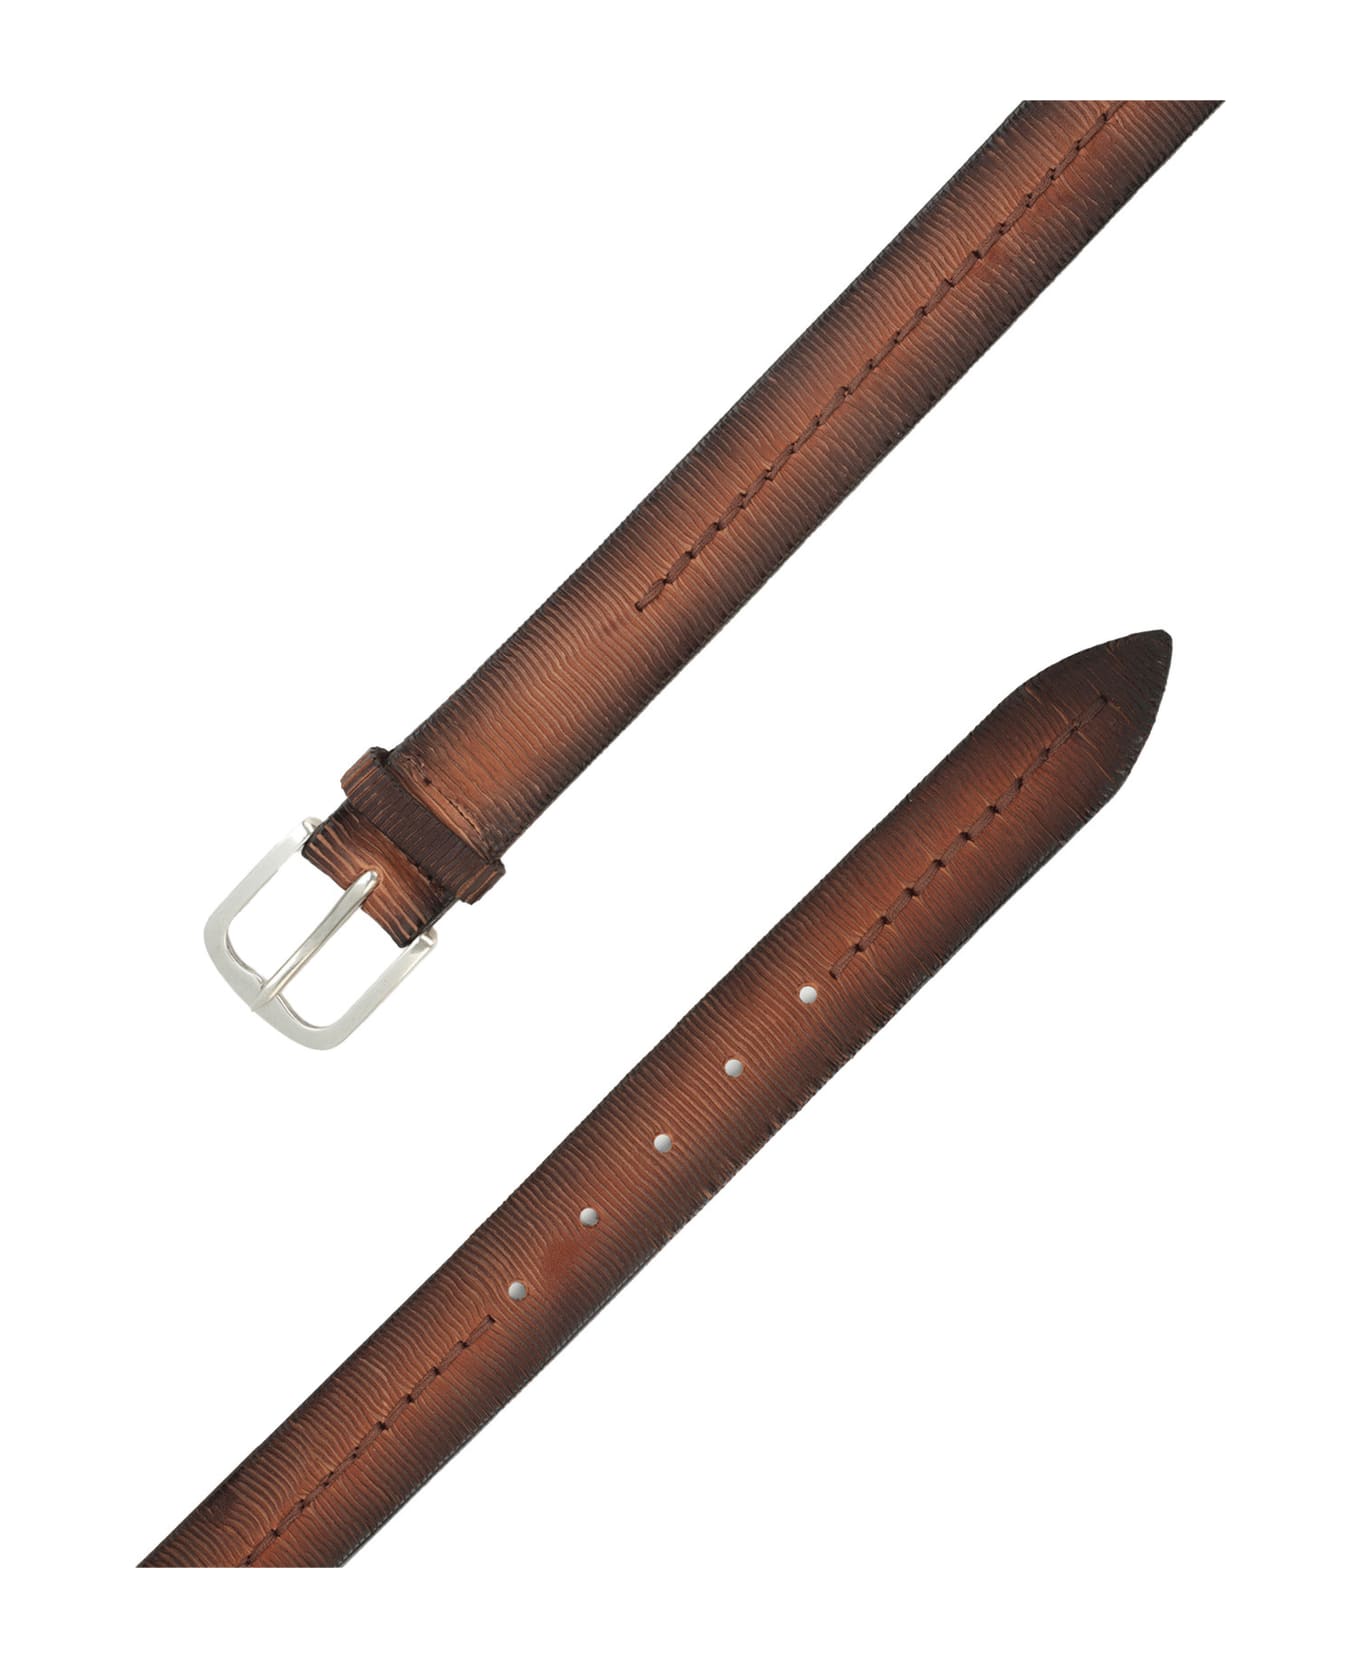 Orciani Brown Blade Belt With Stitching - Brown